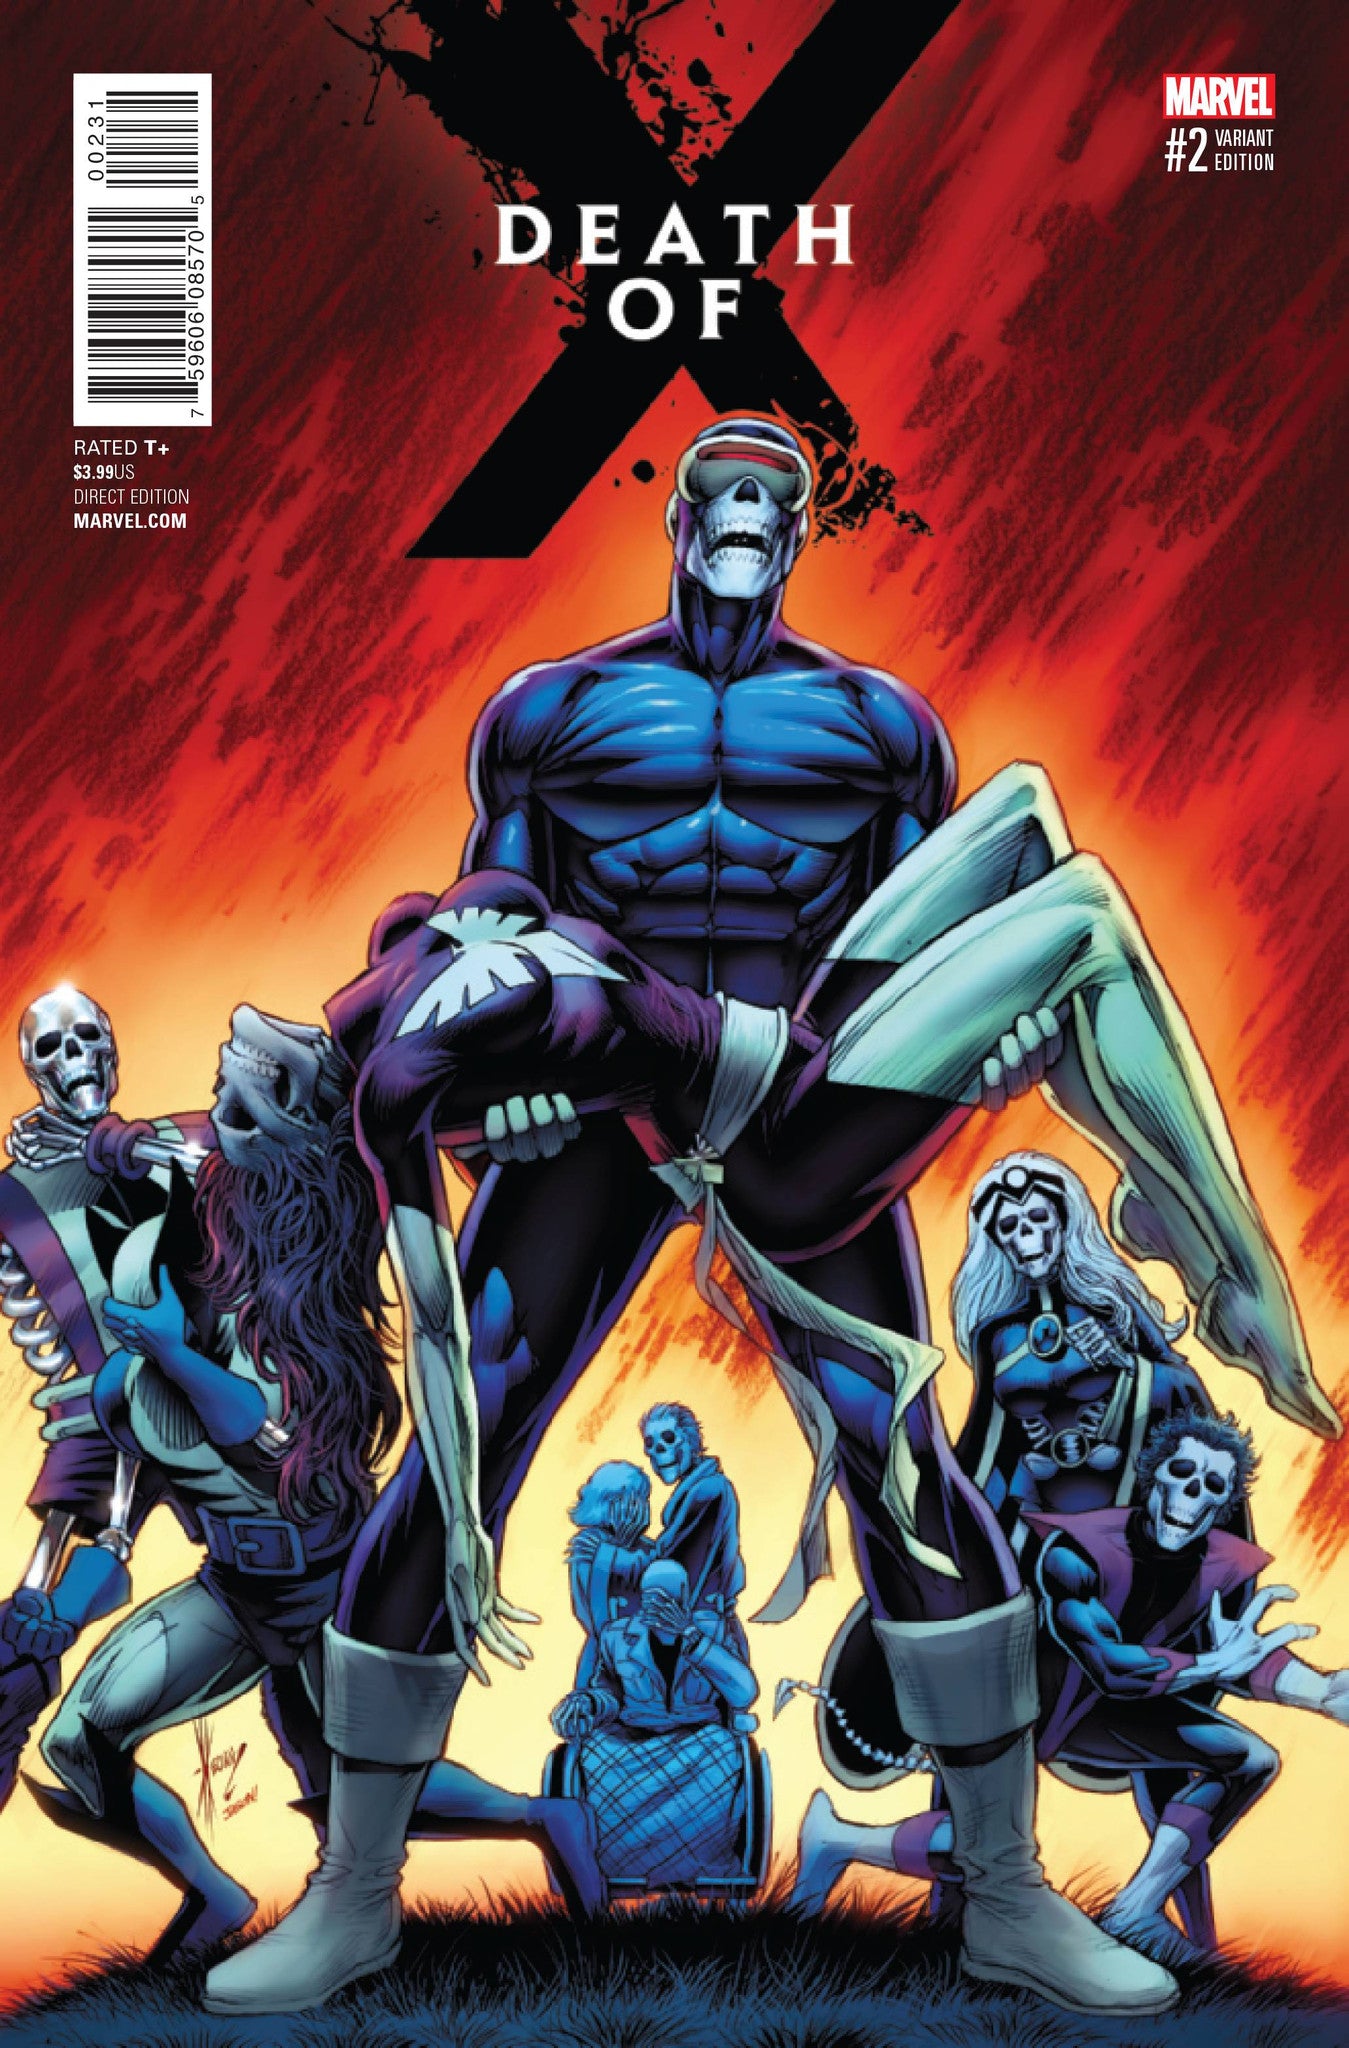 DEATH OF X #2 (OF 4) KEOWN CLASSIC VAR COVER